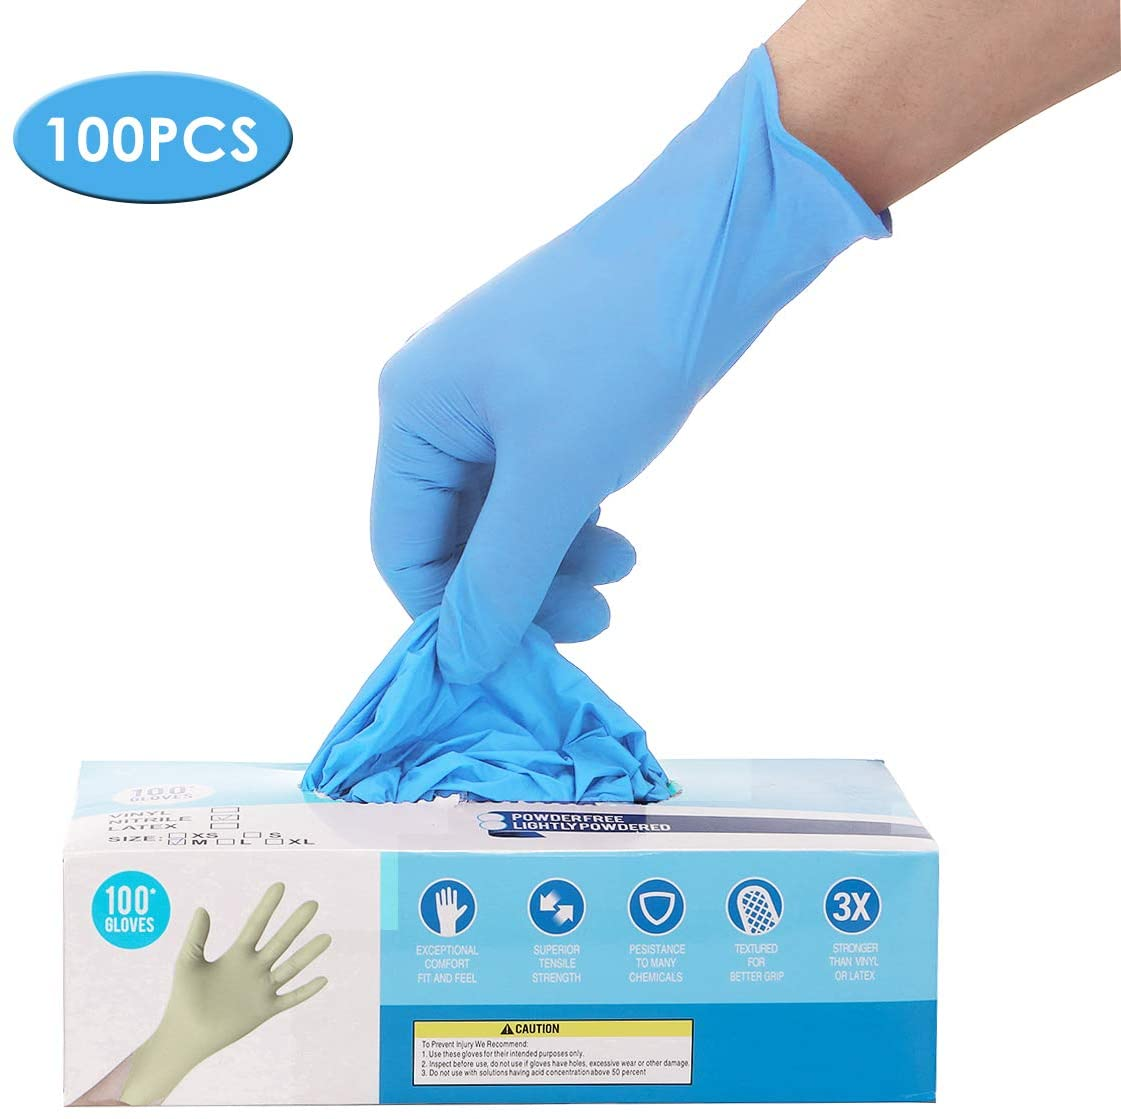 IPRee® 100 Pcs Nitrile Disposable Gloves Powder Free Rubber Latex Free Sterile Gloves for Picnic Food Hygiene House Cleaning